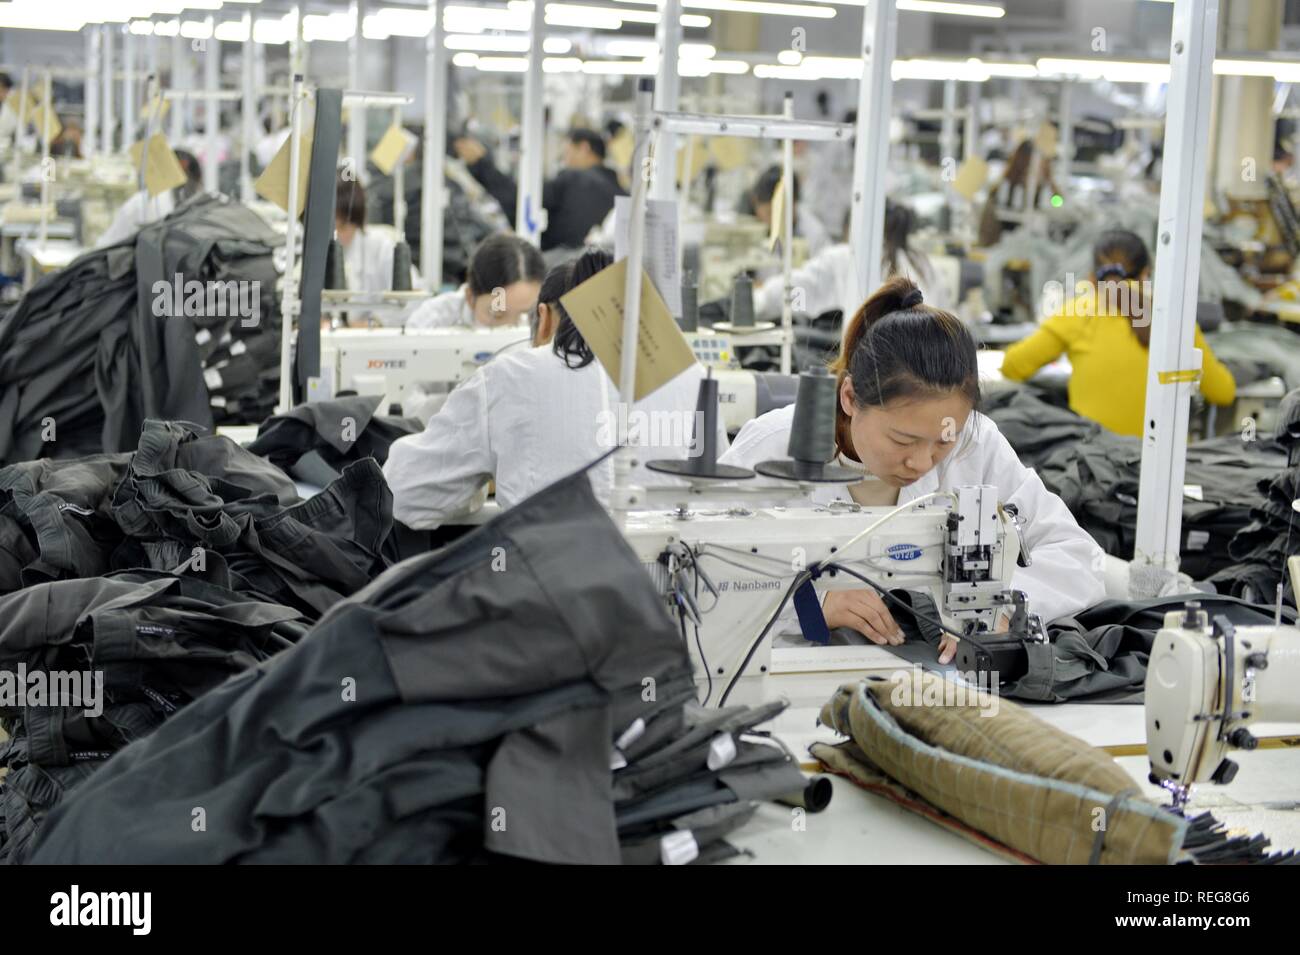 (190122) -- BEIJING, Jan. 22, 2019 (Xinhua) -- Workers sew clothes at a workshop of an enterprise in Ningjin County, north China's Heibei Province, Dec. 29, 2018. China's economy grew 6.6 percent year on year in 2018, beating the official annual target of around 6.5 percent, data from the National Bureau of Statistics (NBS) showed Monday.    The country's gross domestic product (GDP) hit 90.03 trillion yuan (about 13.32 trillion U.S. dollars) in 2018. The following are a group of facts and figures released by the NBS on its solid economic performance last year.    -- China's fixed-asset invest Stock Photo